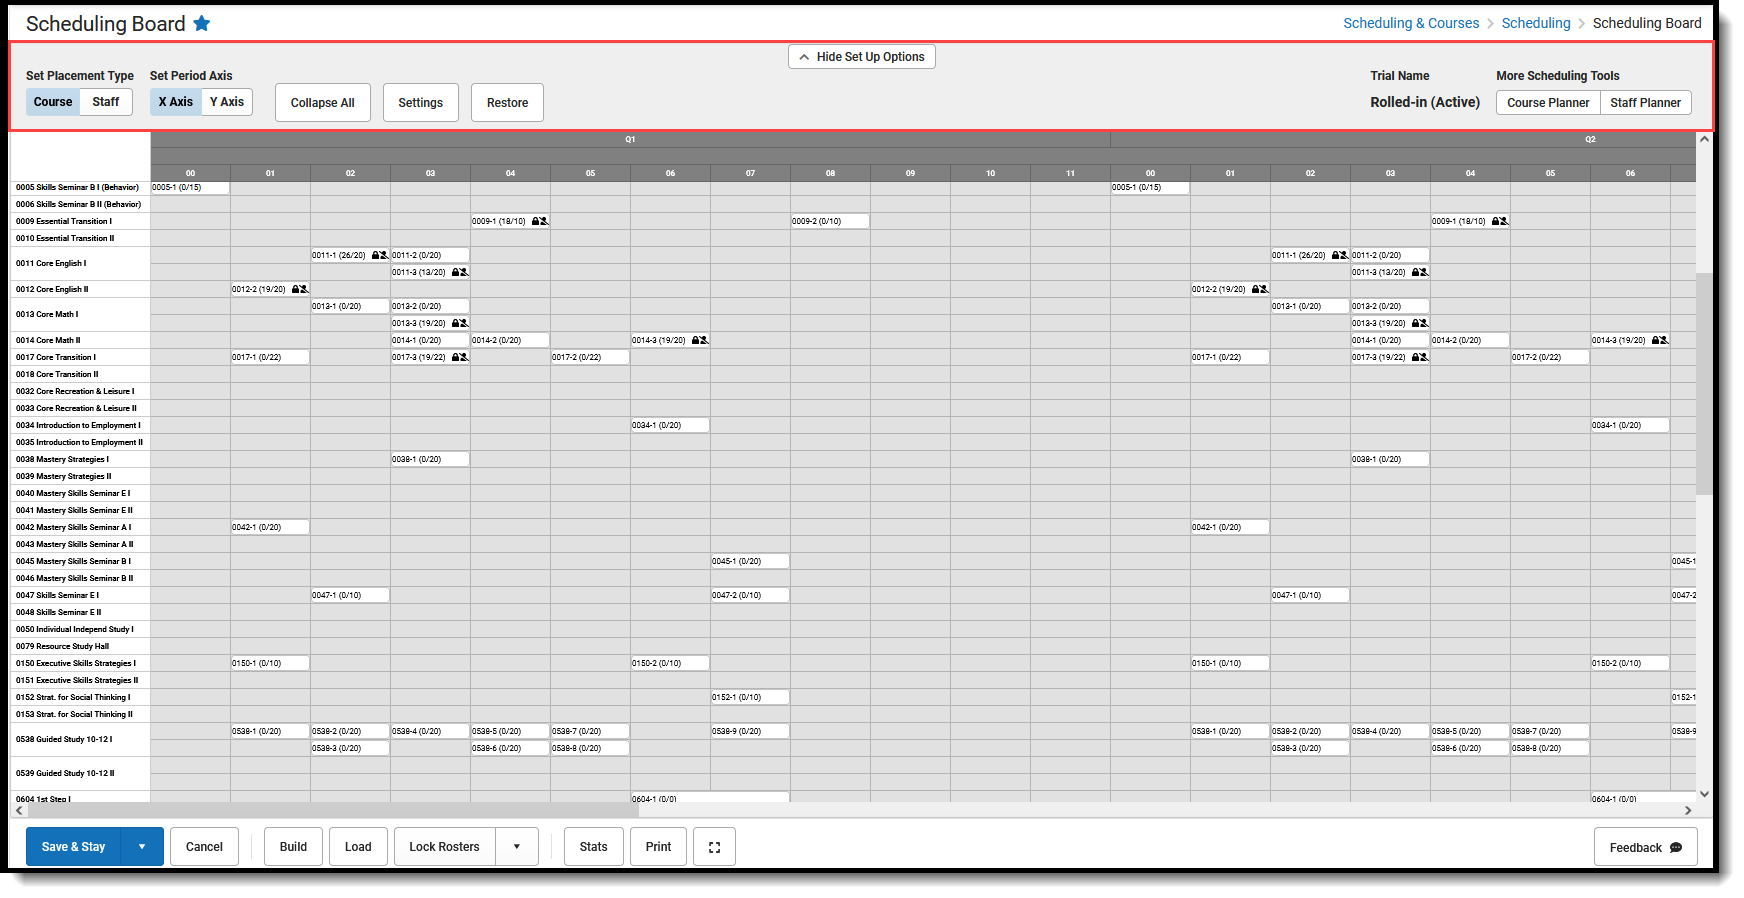 Screenshot of the available settings for the Scheduling Board.